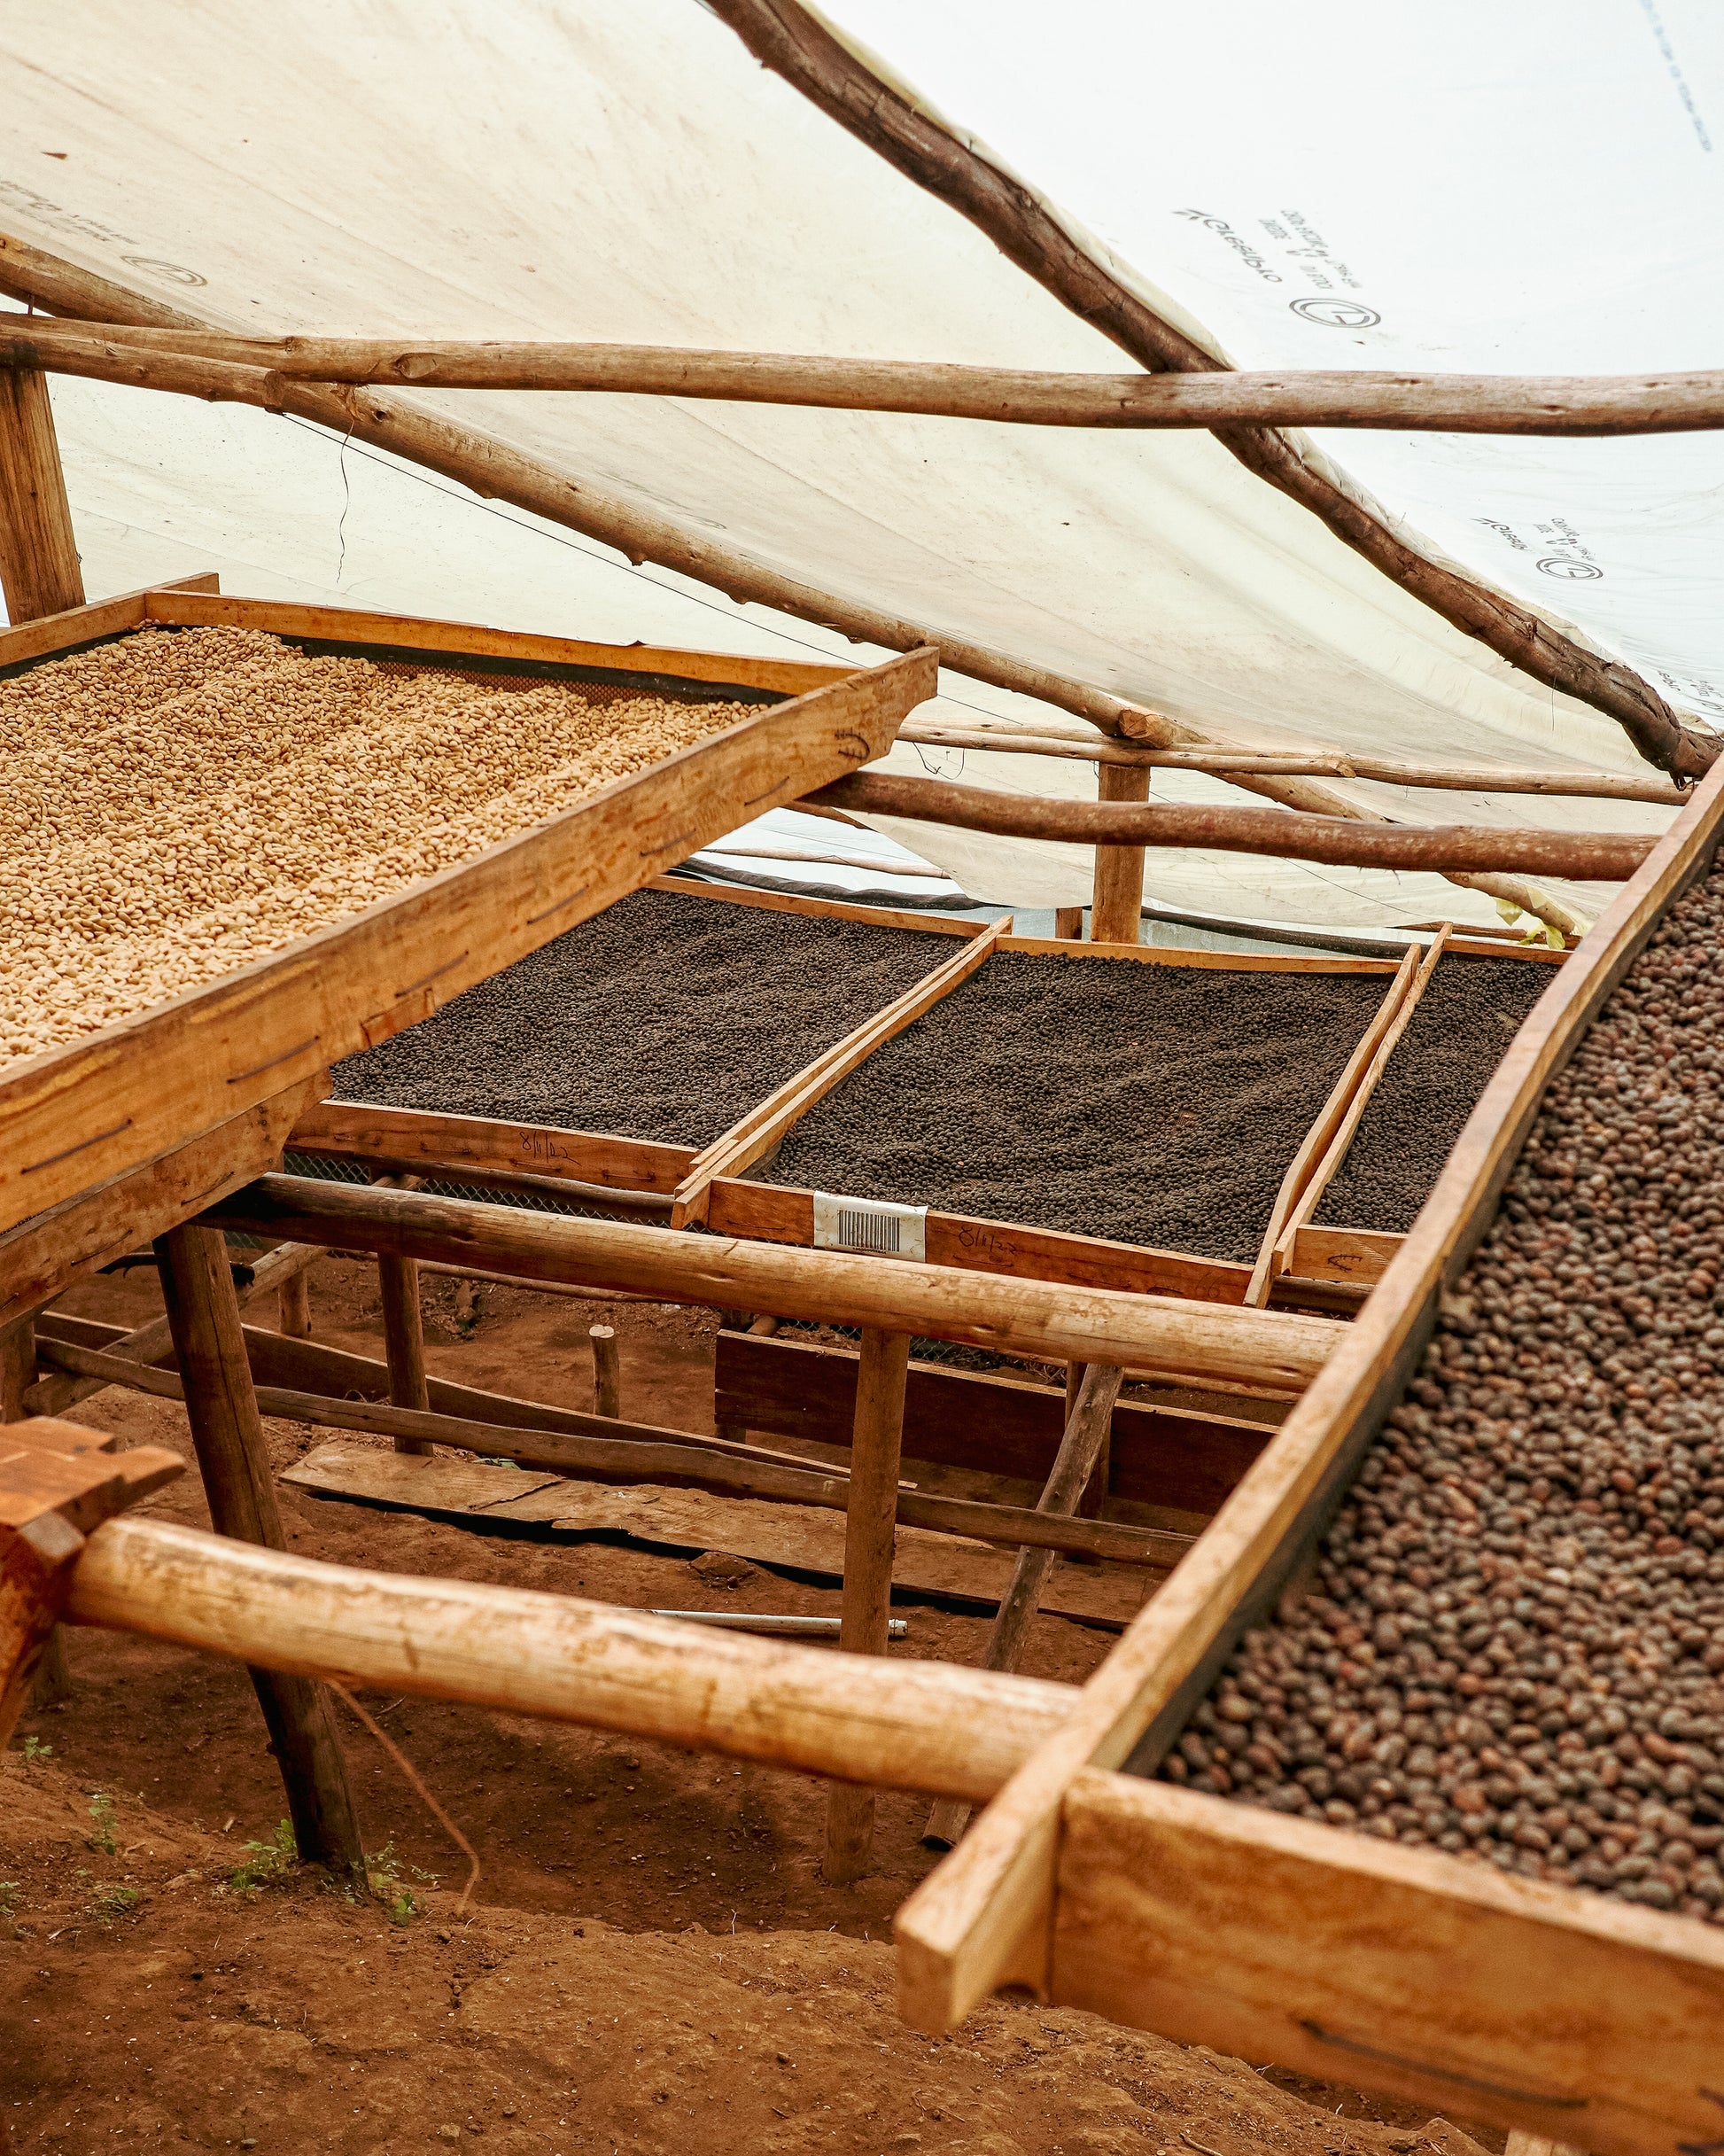 image of coffees drying at Mabono